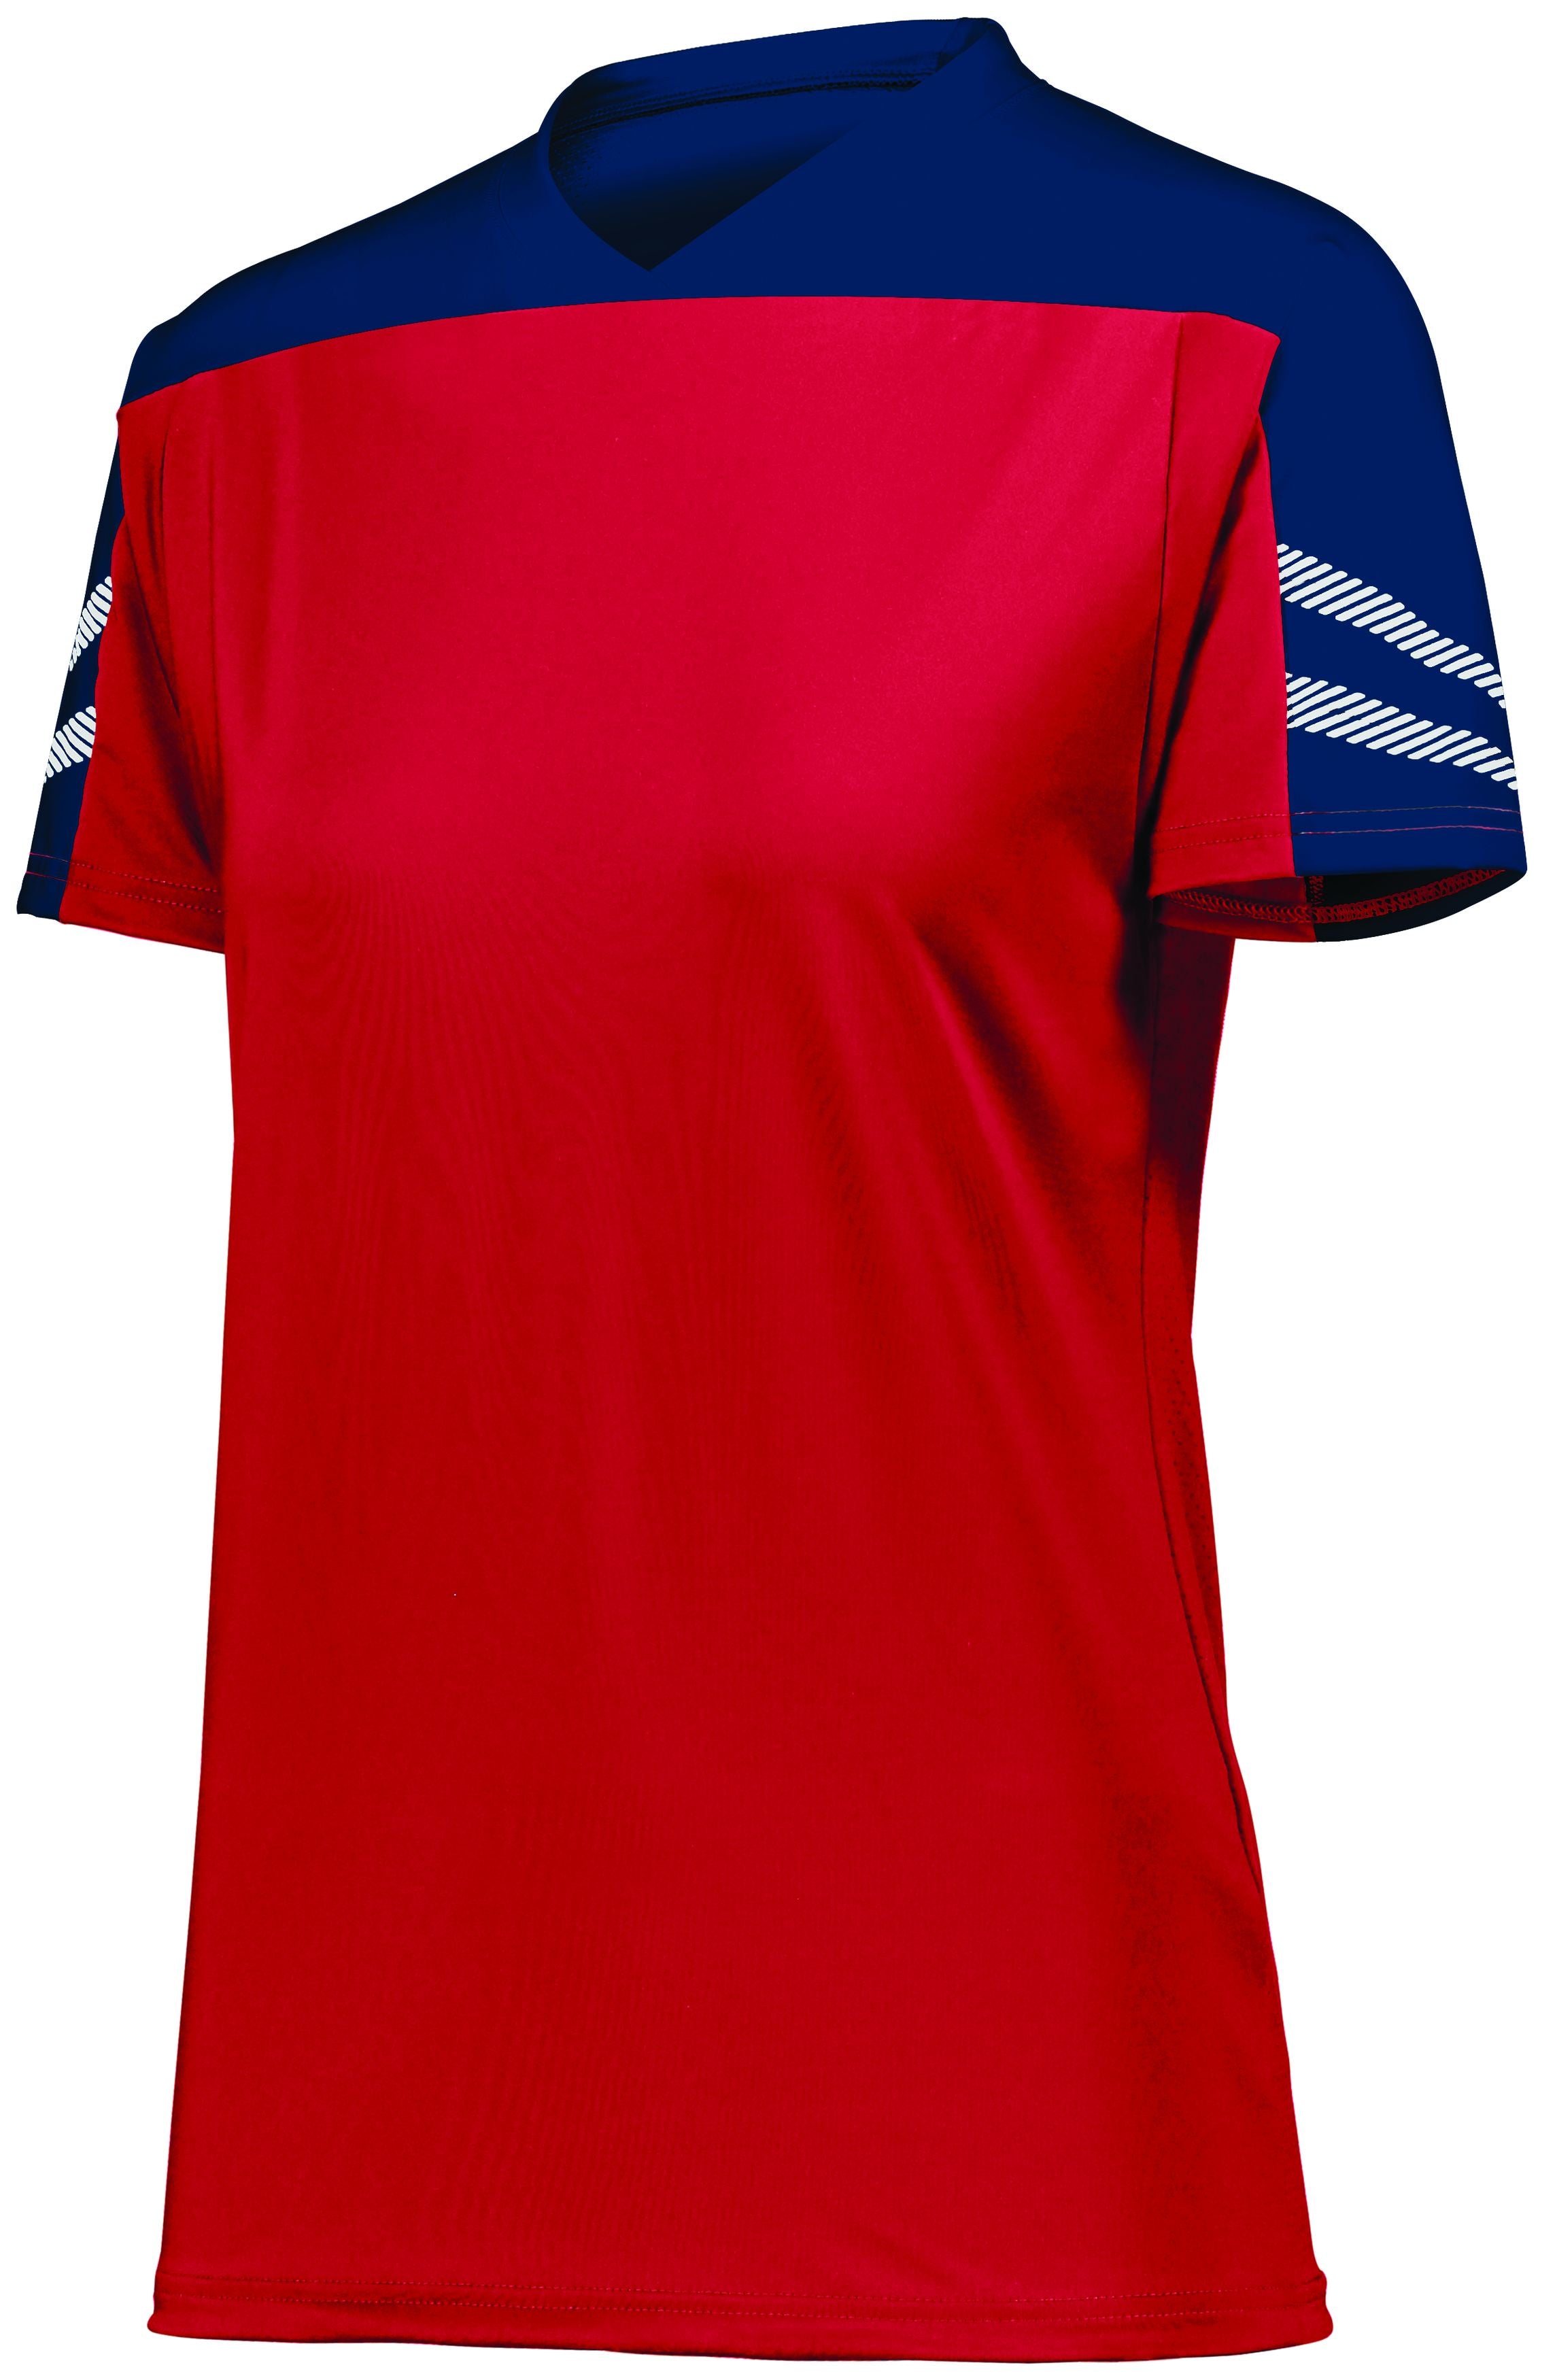 High 5 Ladies Anfield Soccer Jersey in Scarlet/Navy/White  -Part of the Ladies, Ladies-Jersey, High5-Products, Soccer, Shirts, All-Sports-1 product lines at KanaleyCreations.com